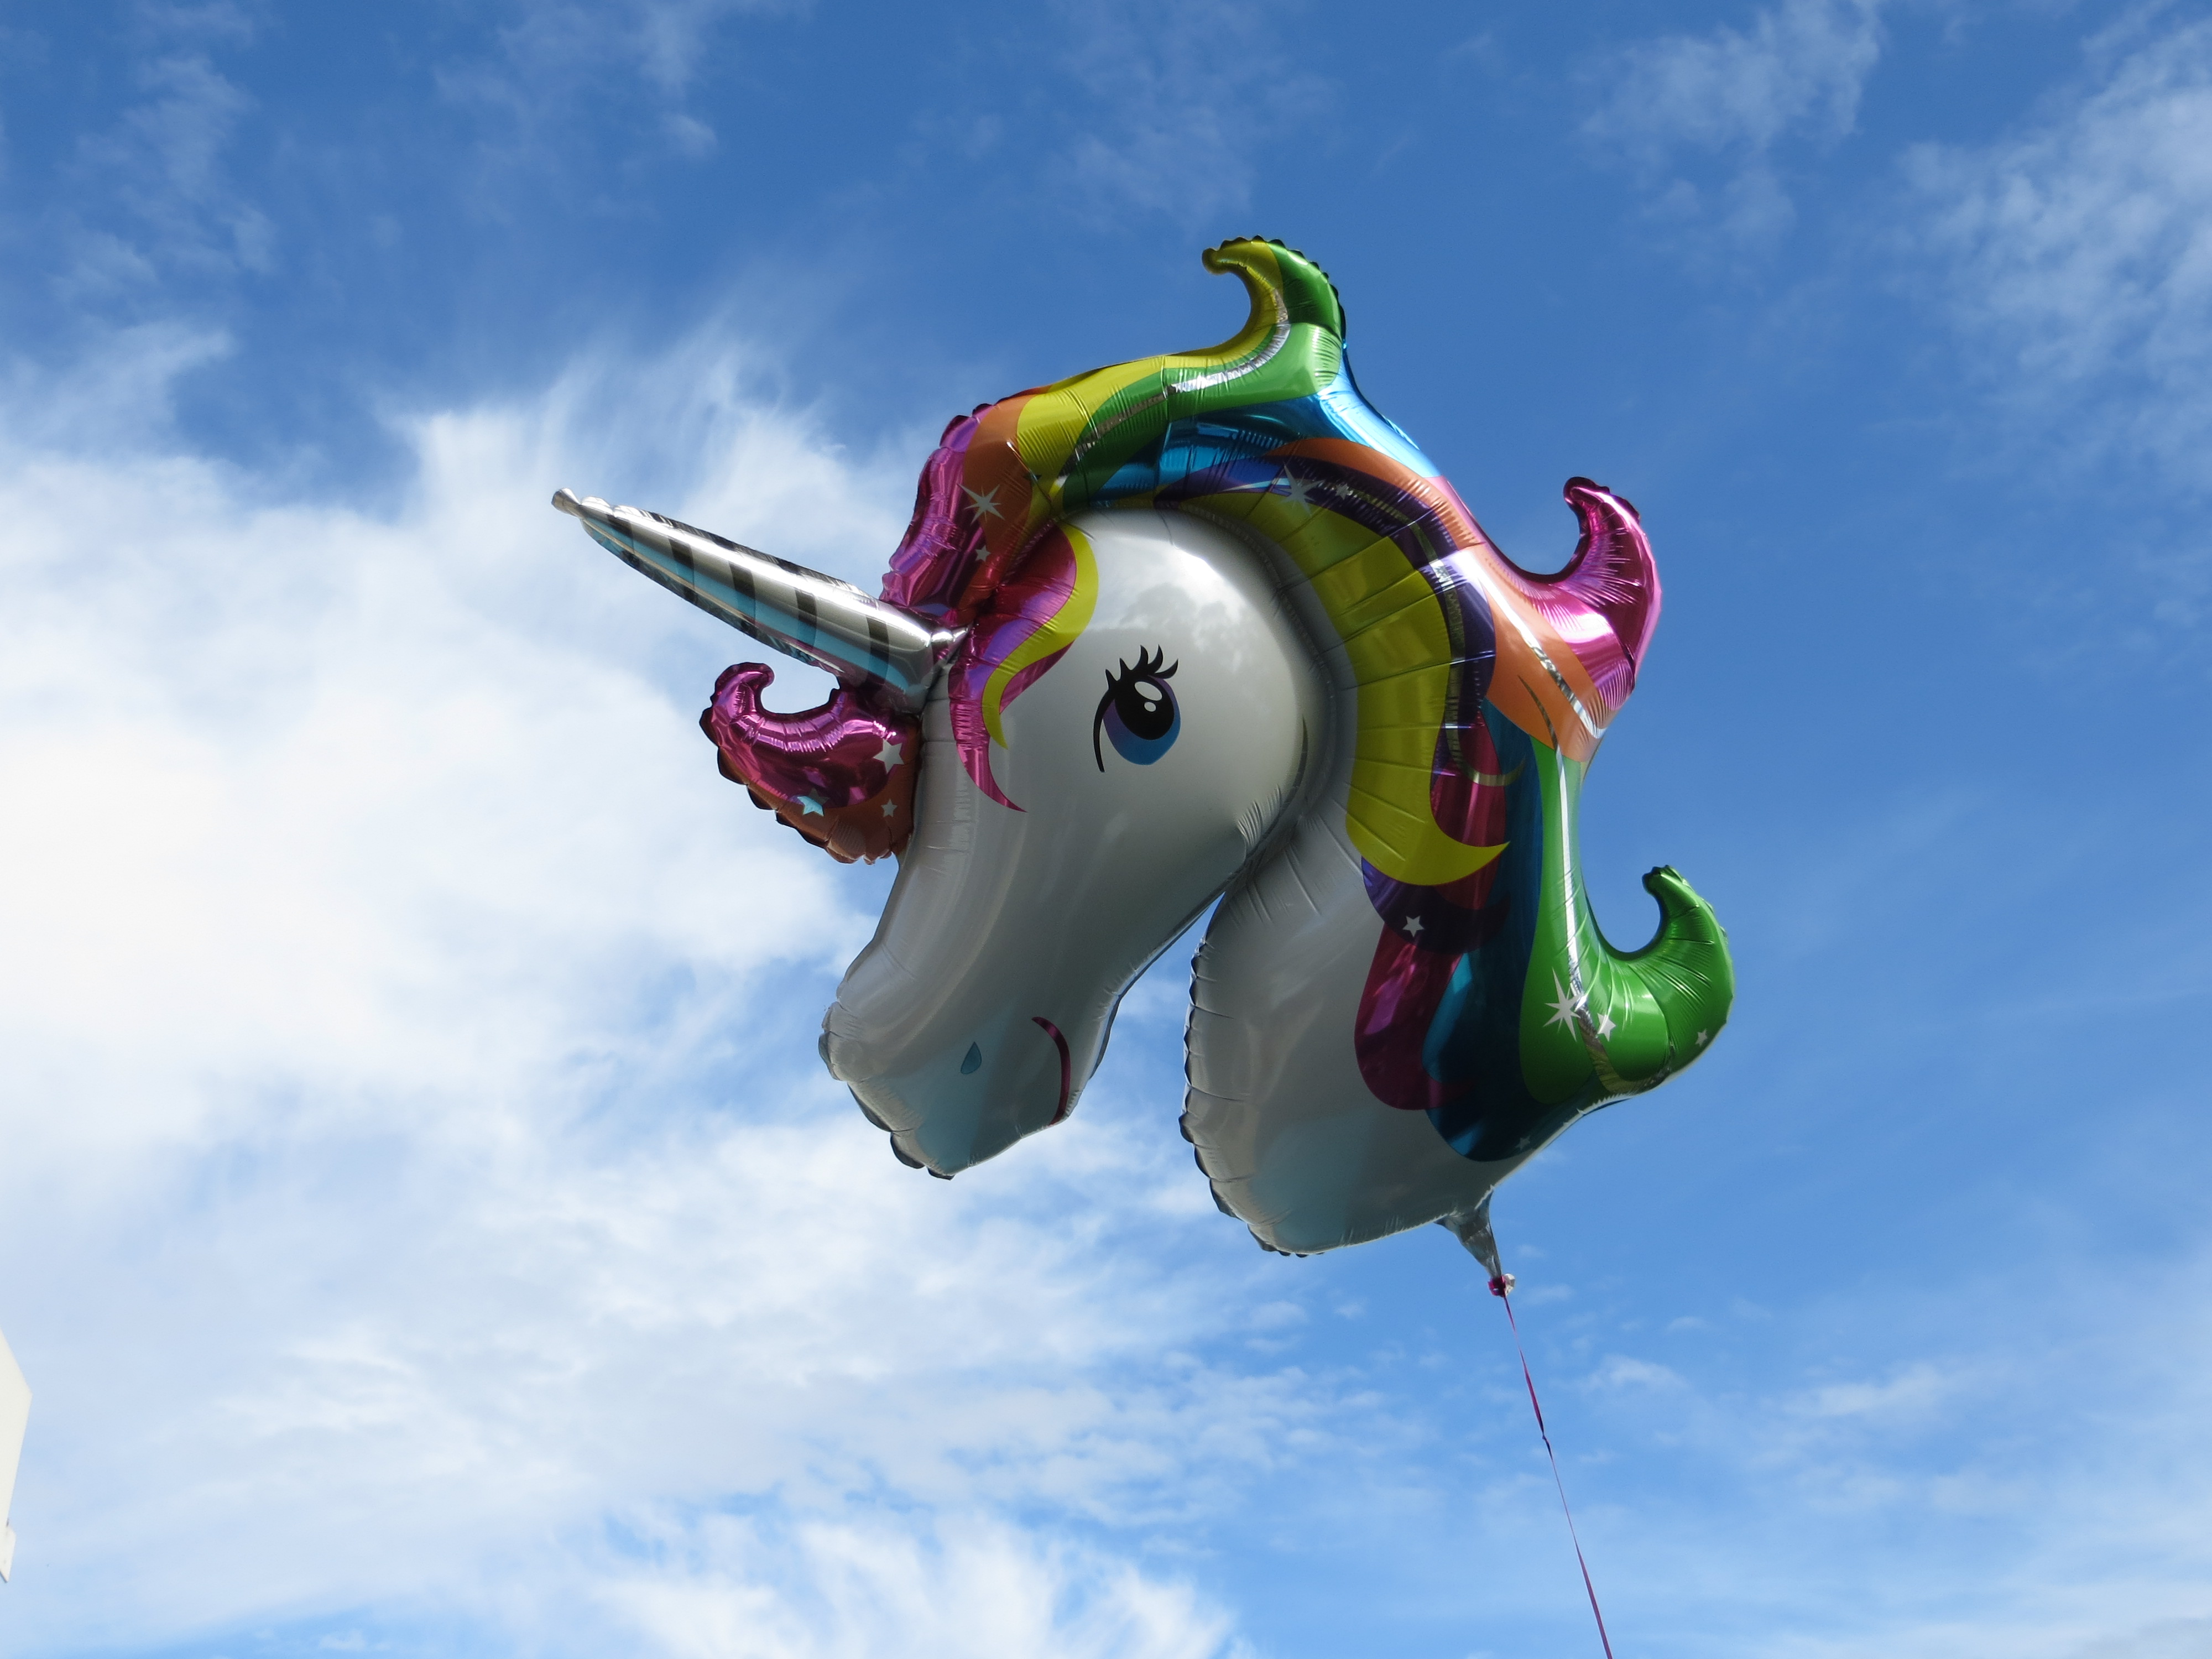 This rainbow unicorn, floating serenely on a cloudy background, is winking right at you. Down below, we are celebrating GOU #3’s second birthday. Photo taken with the expert assistance of GOU#1, age 11 going on 32.